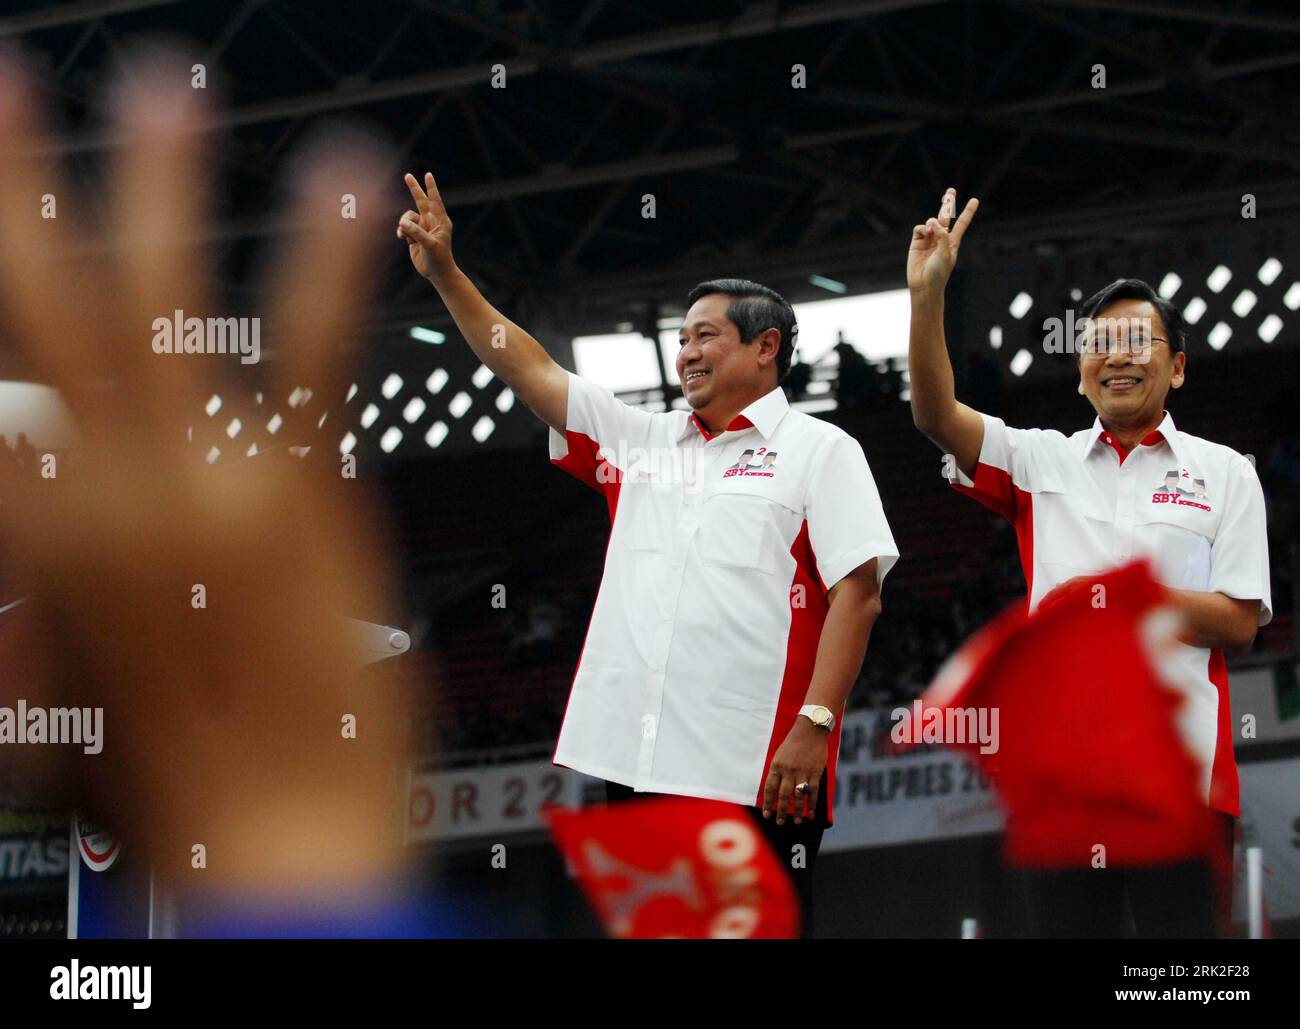 Bildnummer: 53176702  Datum: 04.07.2009  Copyright: imago/Xinhua Indonesian President Susilo Bambang Yudhoyono (L) and his running mate Boediono wave to supporters during a campaign rally in Jakarta . Indonesia will hold presidential election on July 8. The three presidential candidates are President Susilo Bambang Yudhoyono, Vice President Jusuf Kalla and Former President Megawati Soekarnoputri. (Xinhua/Yue Yuewei) (xjq) People Politik Präsidentschaftswahl premiumd  kbdig xub (090704) -- JAKARTA,  (Xinhua) -- Indonesische Präsident Susilo Bambang Yudhoyono (L) und seiner Joggen Mate Boediono Stock Photo